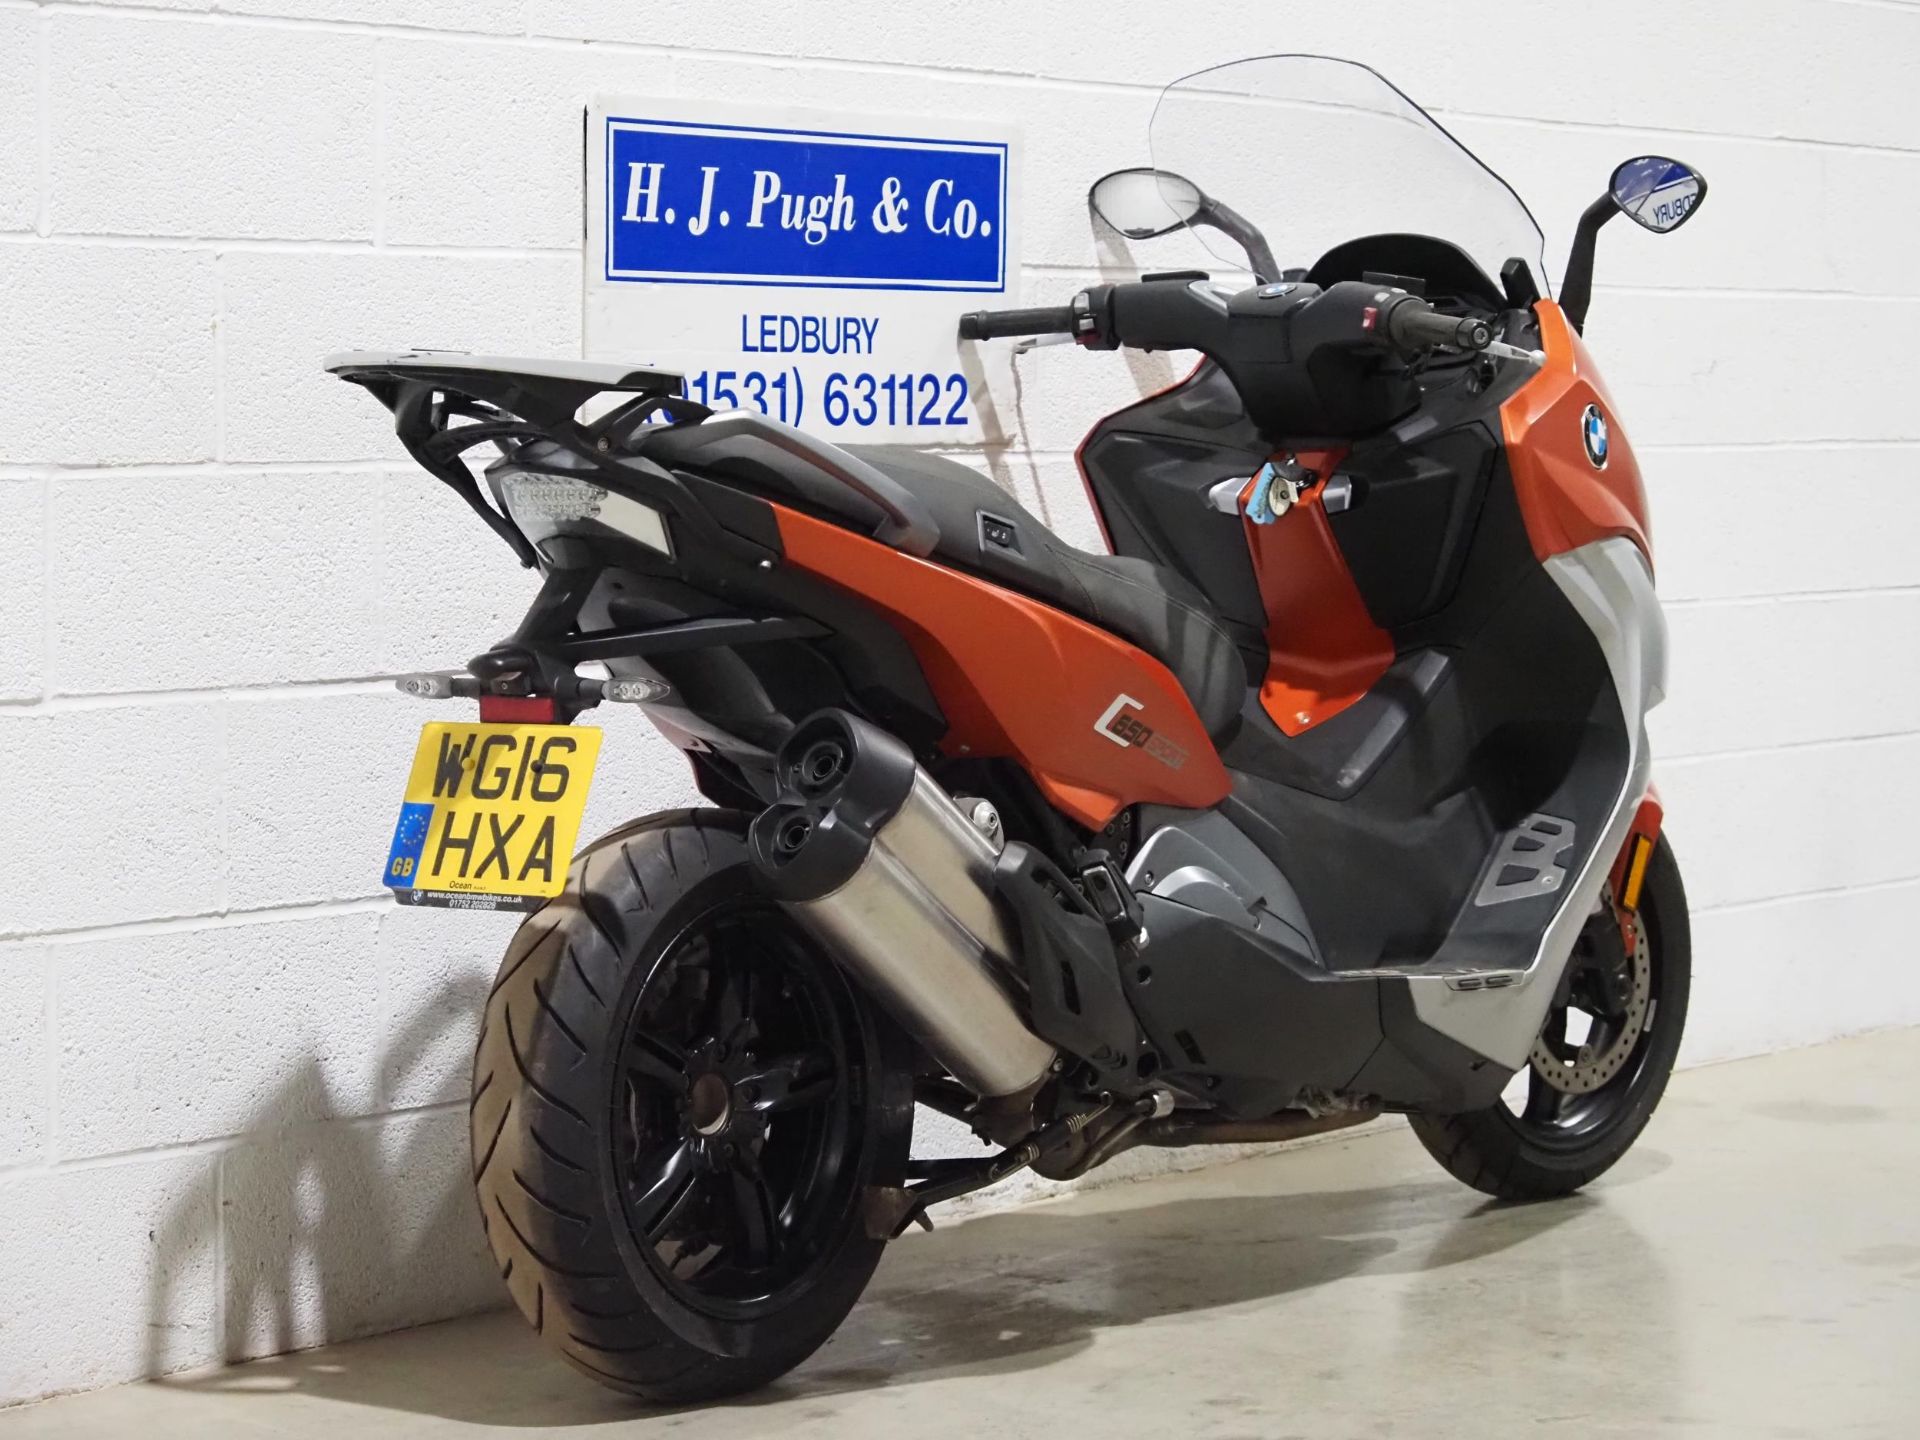 BMW C650 Sport moped. 2016. 647cc. Non runner. Engine turns over and last run in 2020. Comes with - Bild 3 aus 5